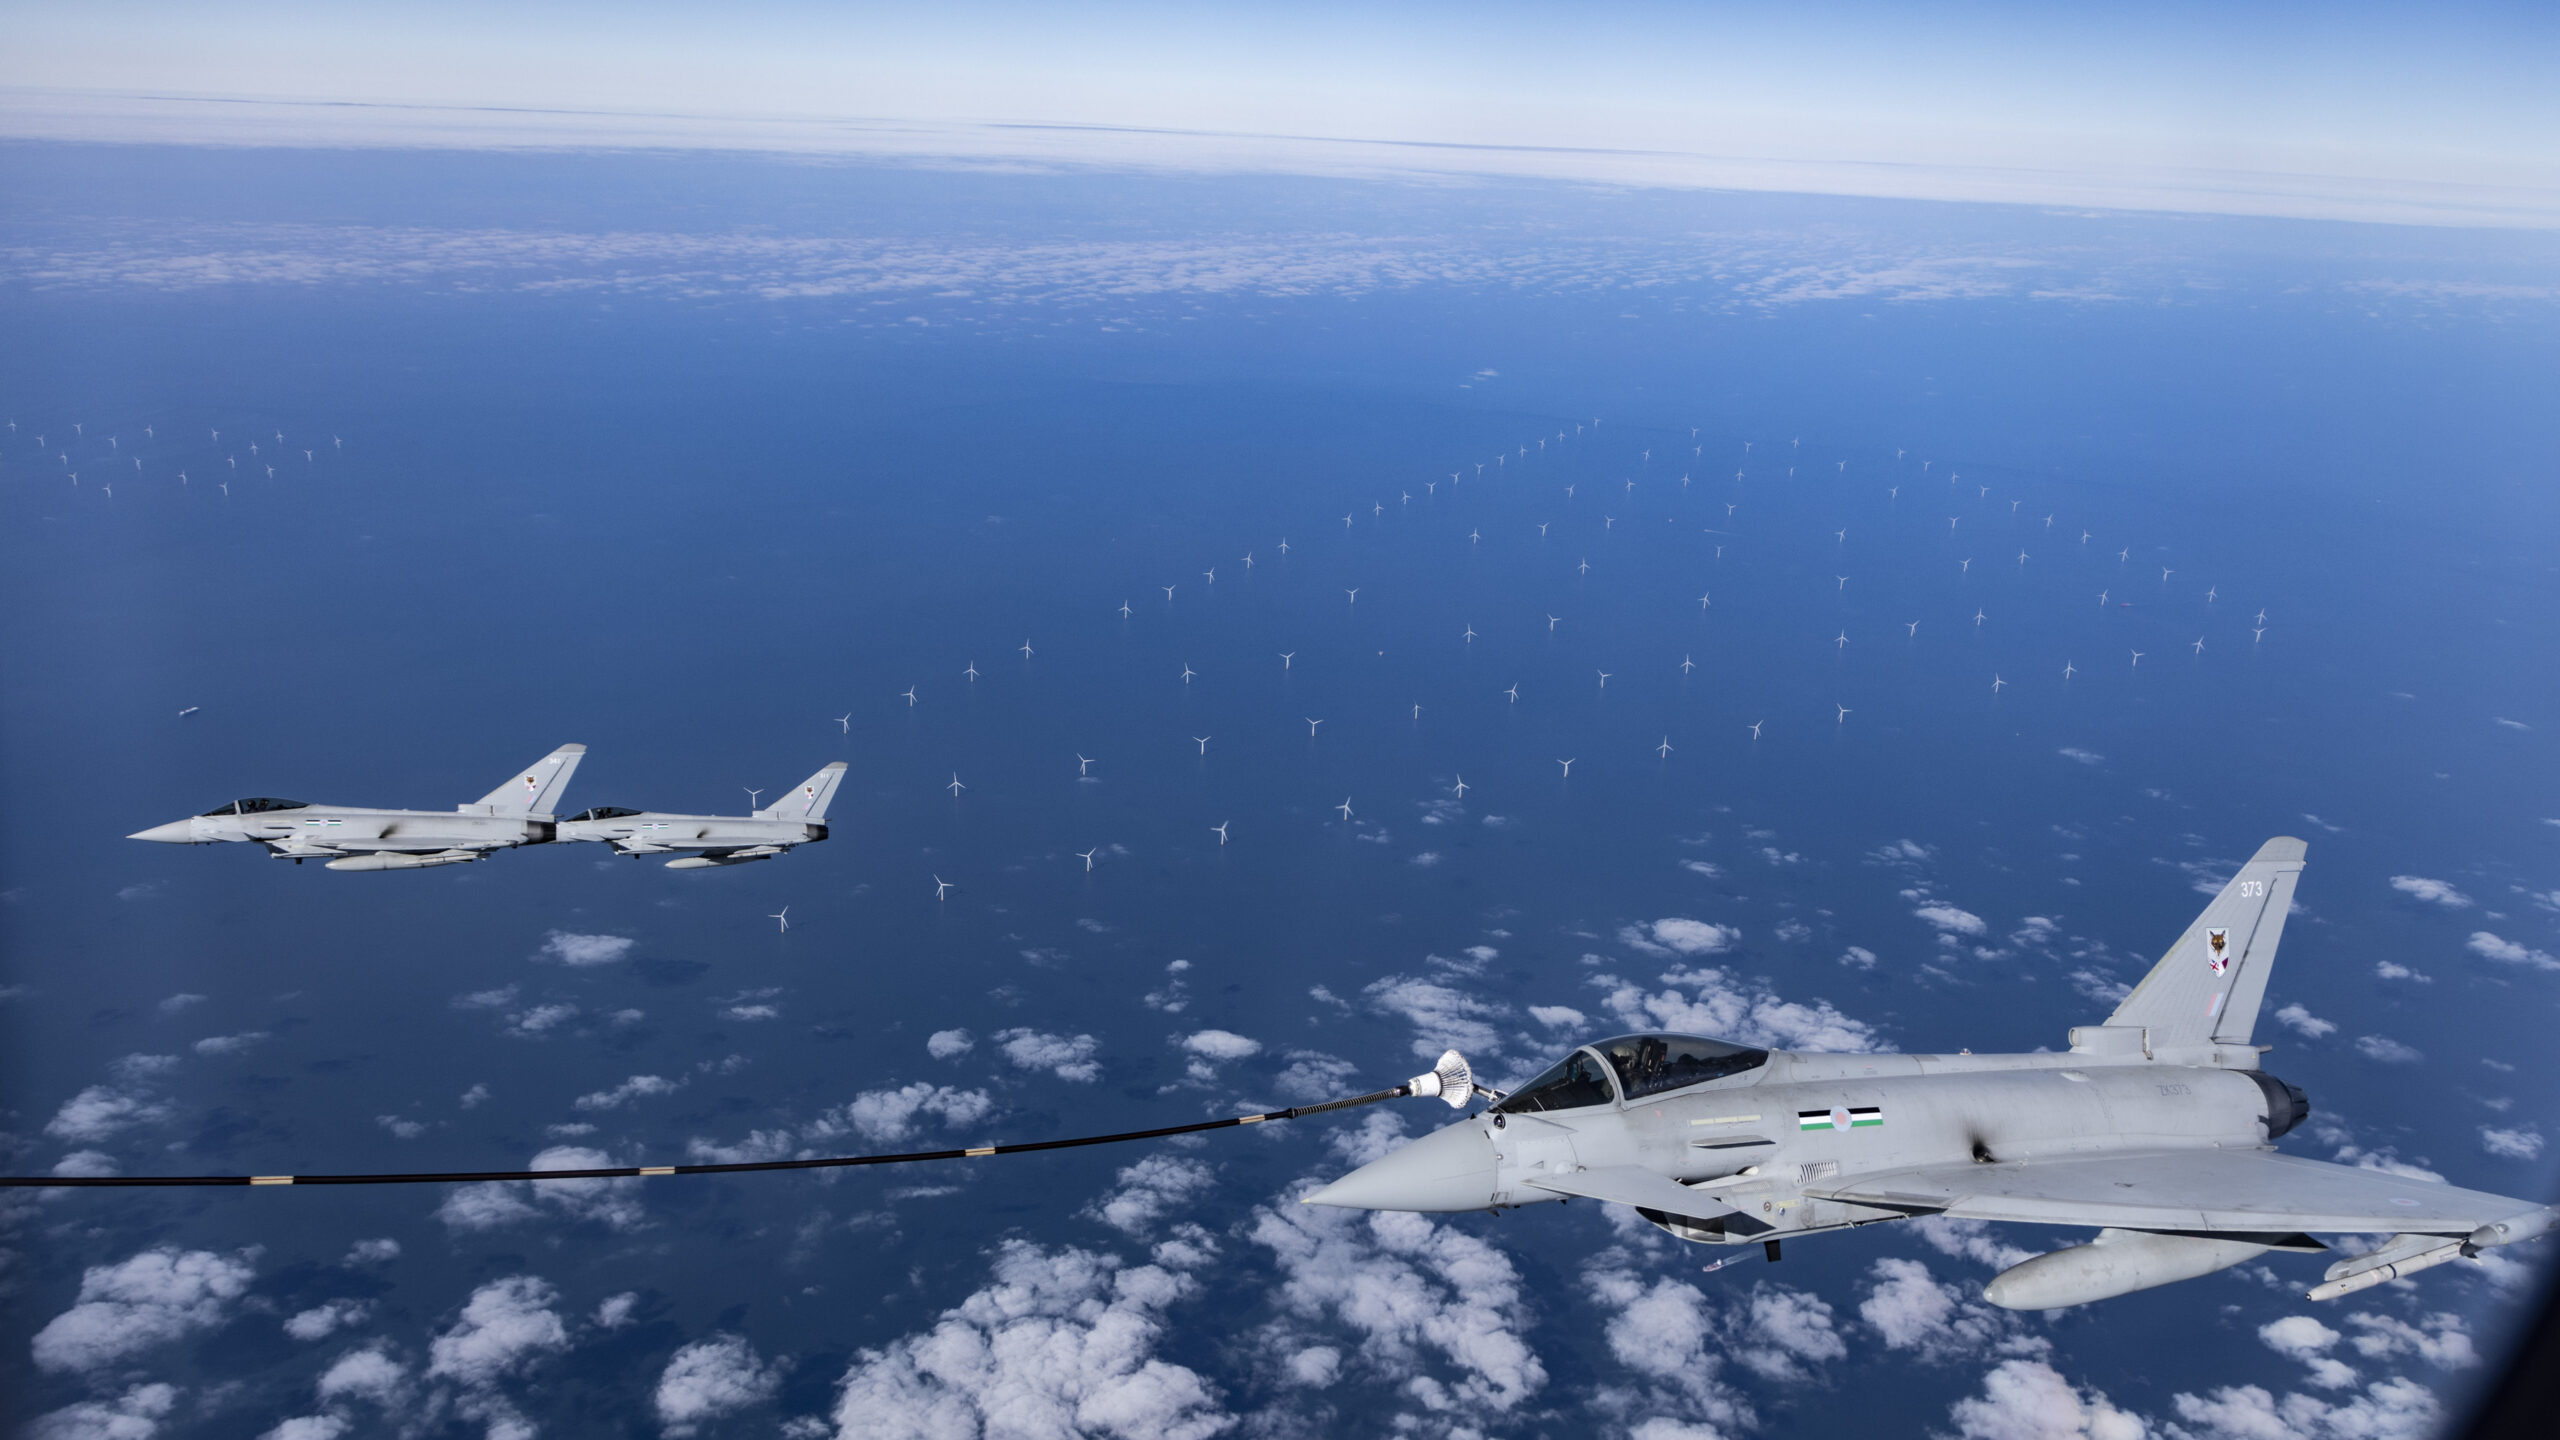 Voyager has refuelled with Typhoon jets over the North Sea. Powered by 43% Sustainable Aviation Fuel made from waste-based feedstocks such as cooking oil Continued #RAF work towards a sustainable aviation future.